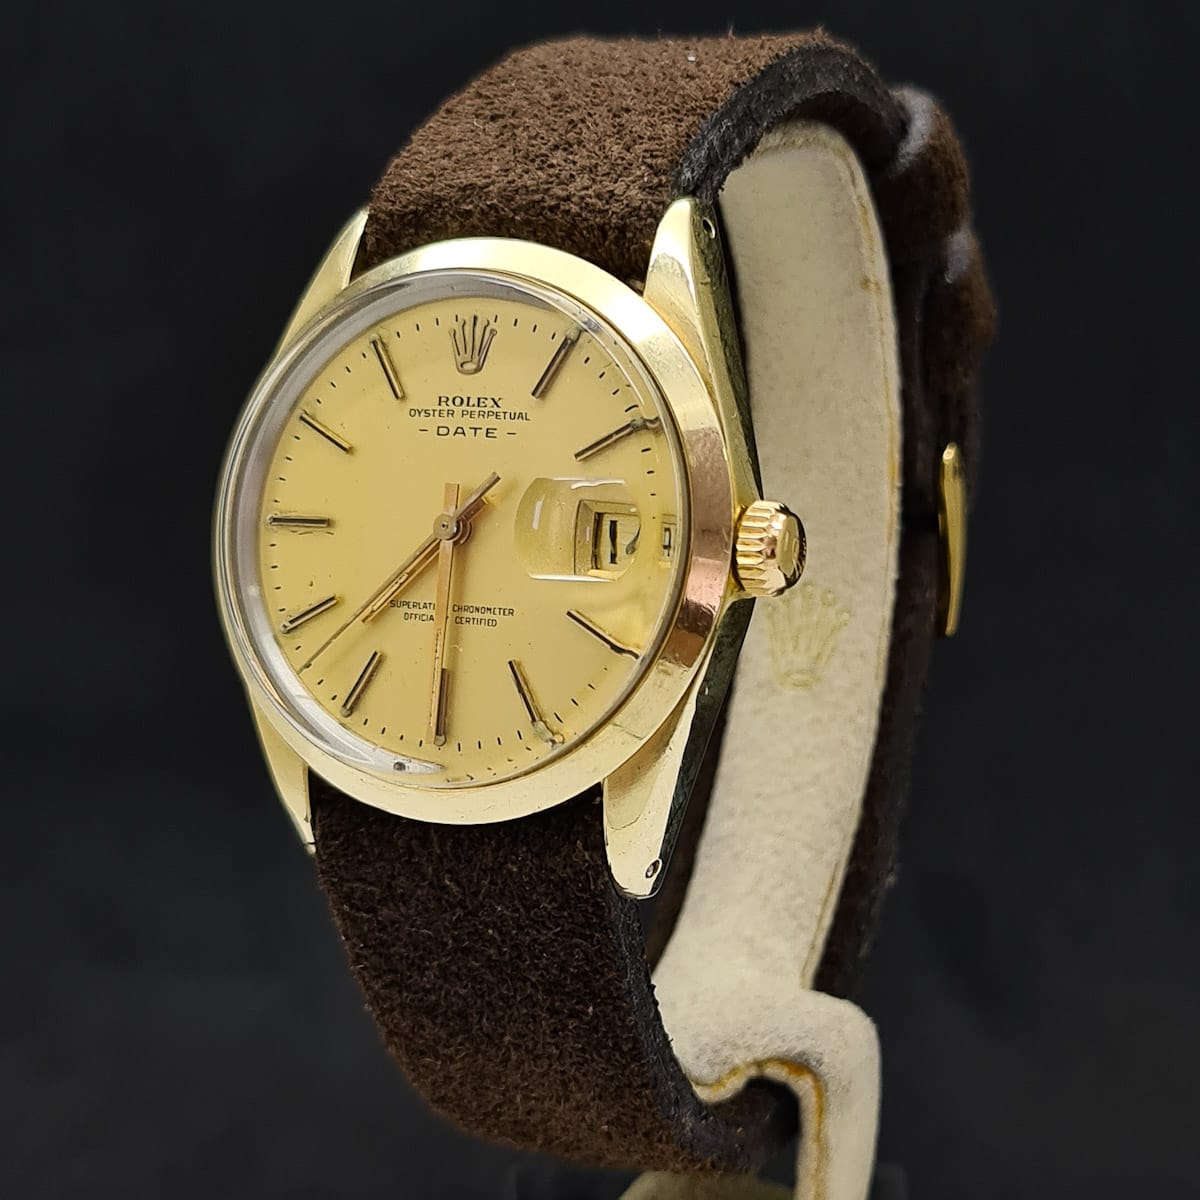 ROLEX OYSTER PERPETUAL DATE - VINTAGE